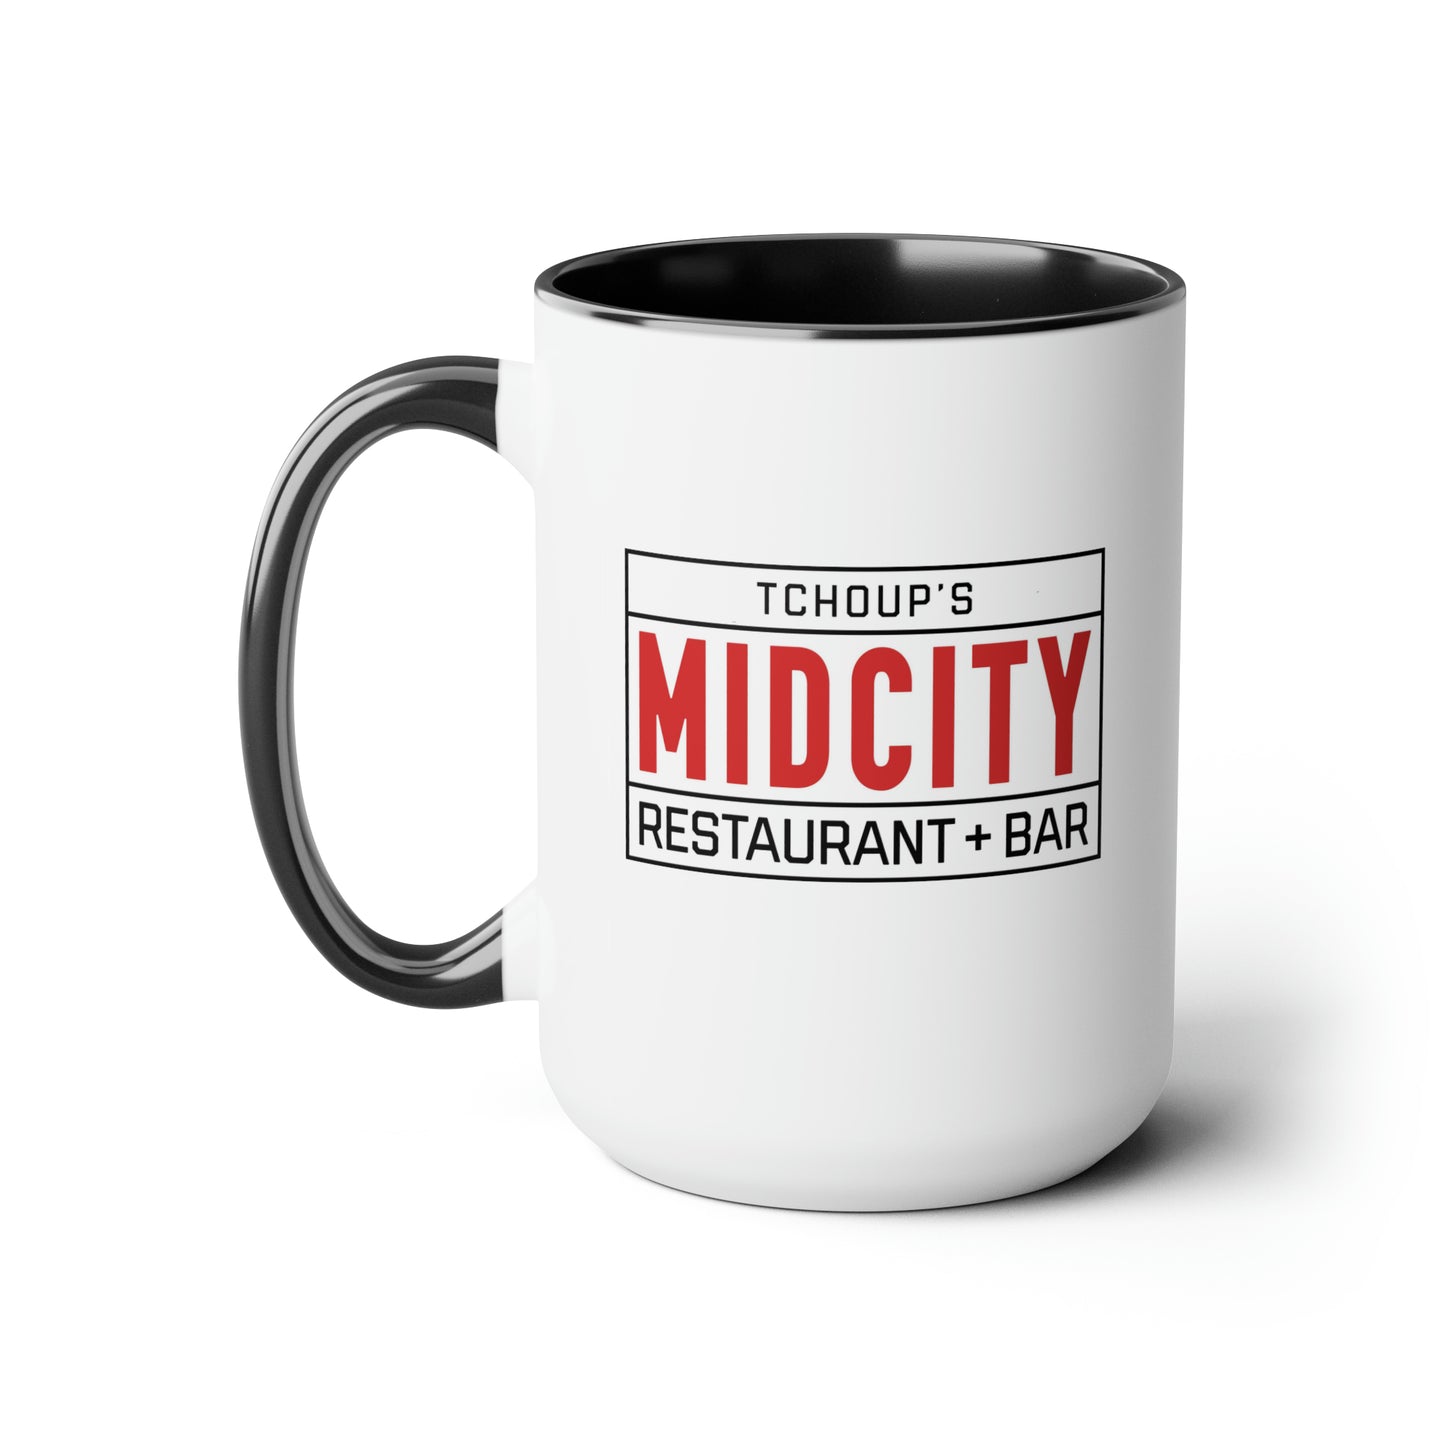 Tchoup’s Midcity Restaurant & Bar Two-Tone Coffee Mugs, 15oz